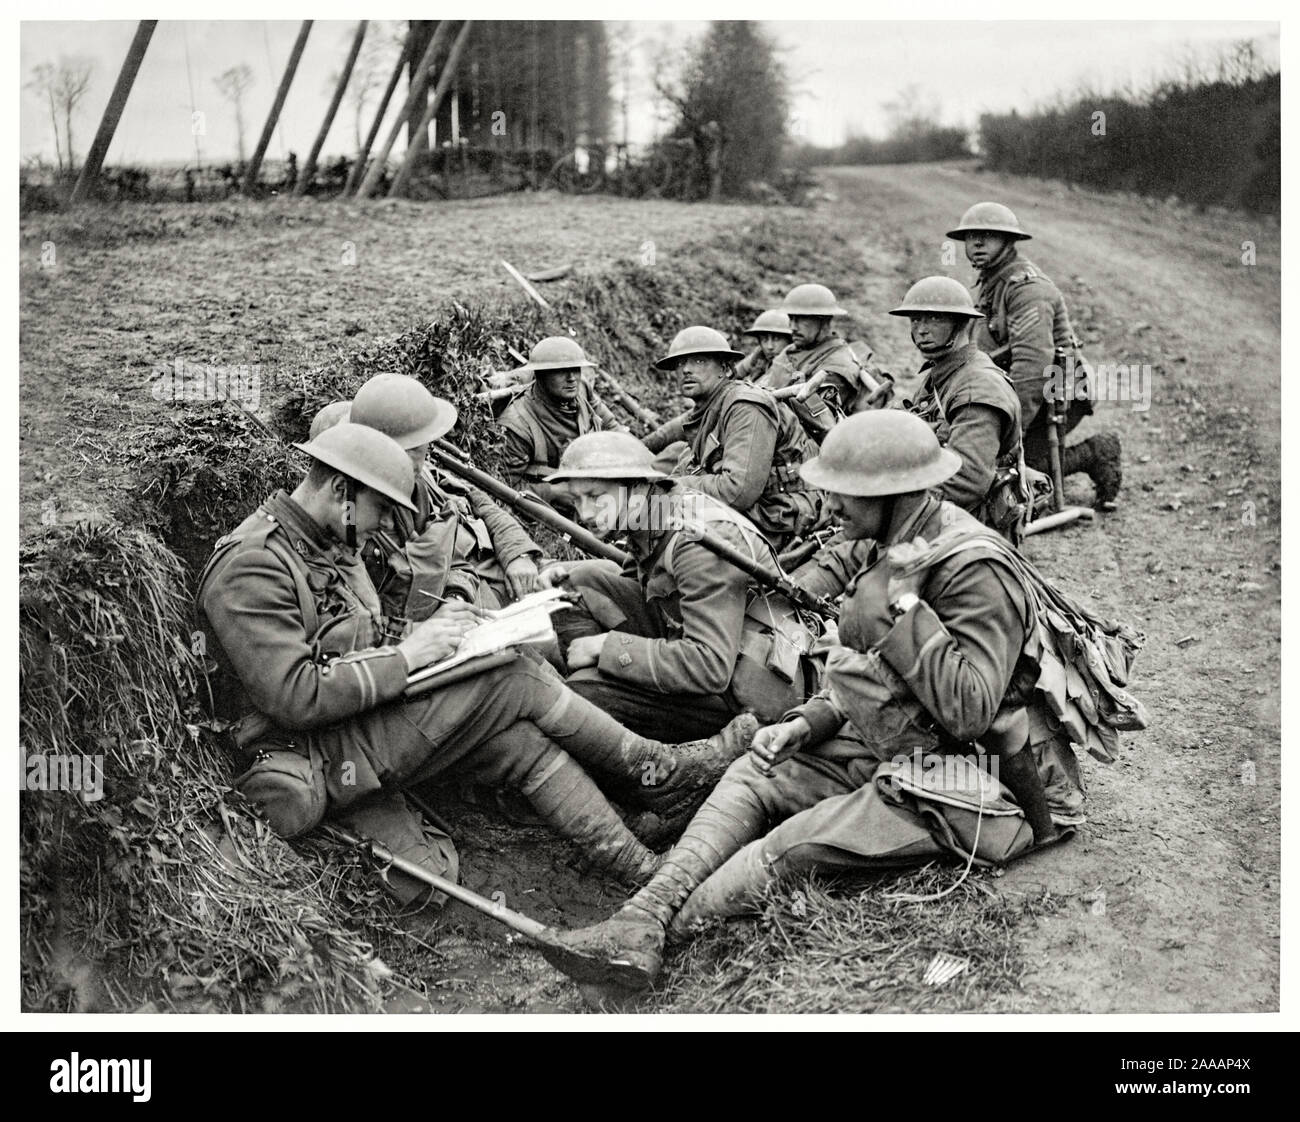 British army infantry (1st Battalion, Middlesex Regiment) near Bailleul, France during the Battle of the Lys (Fourth Battle of Ypres) April 1918 in which the Germans pushed back the British to the Channel ports. French reinforcements that arrived later that month put an end to the German offensive. Over half a million men was killed during April 1918. See description for more information. Stock Photo